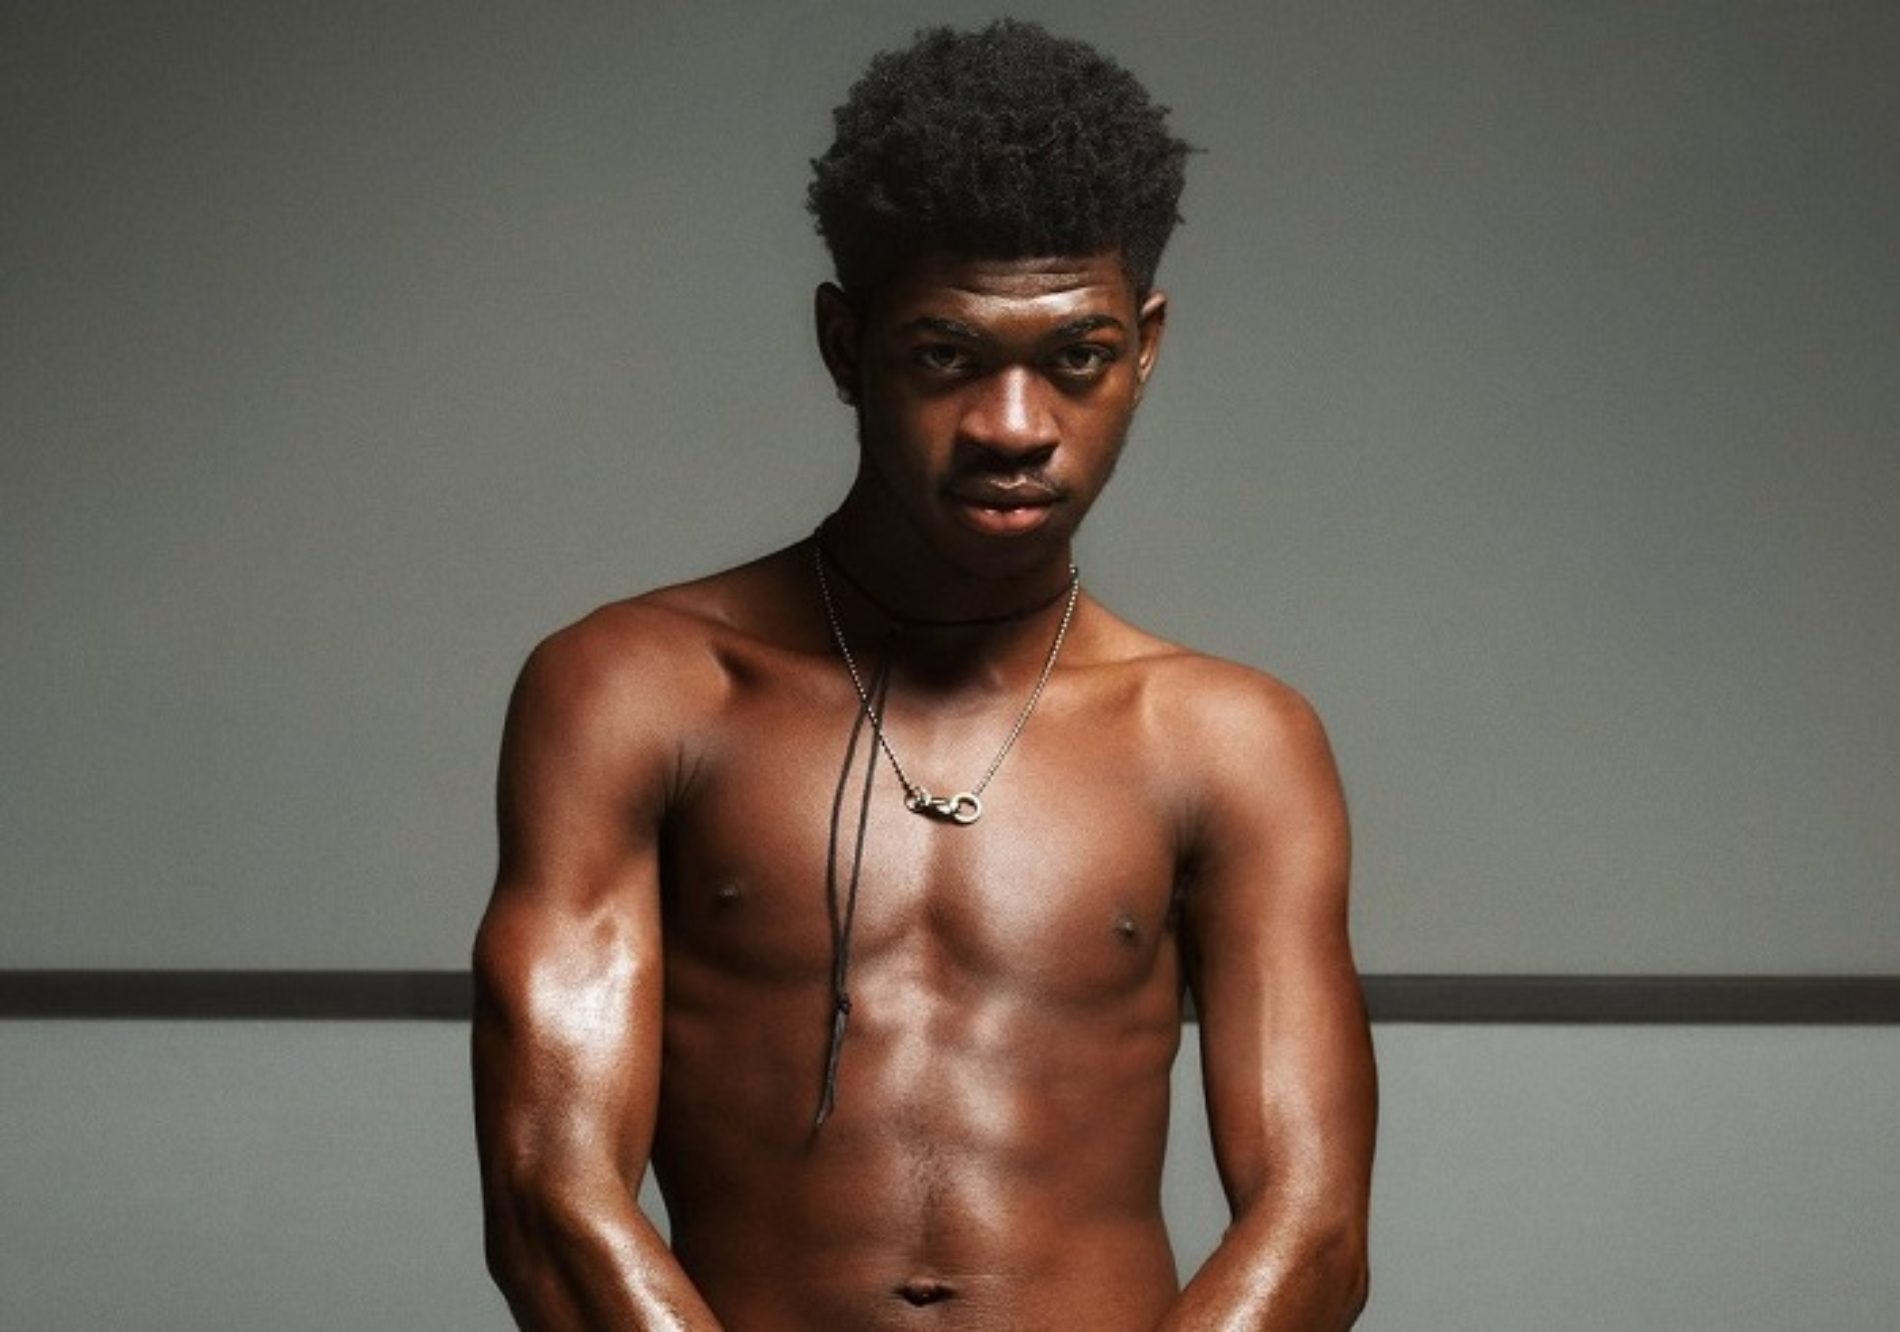 Lil Nas X wants to create an Only Fans page to “interact” with his followers